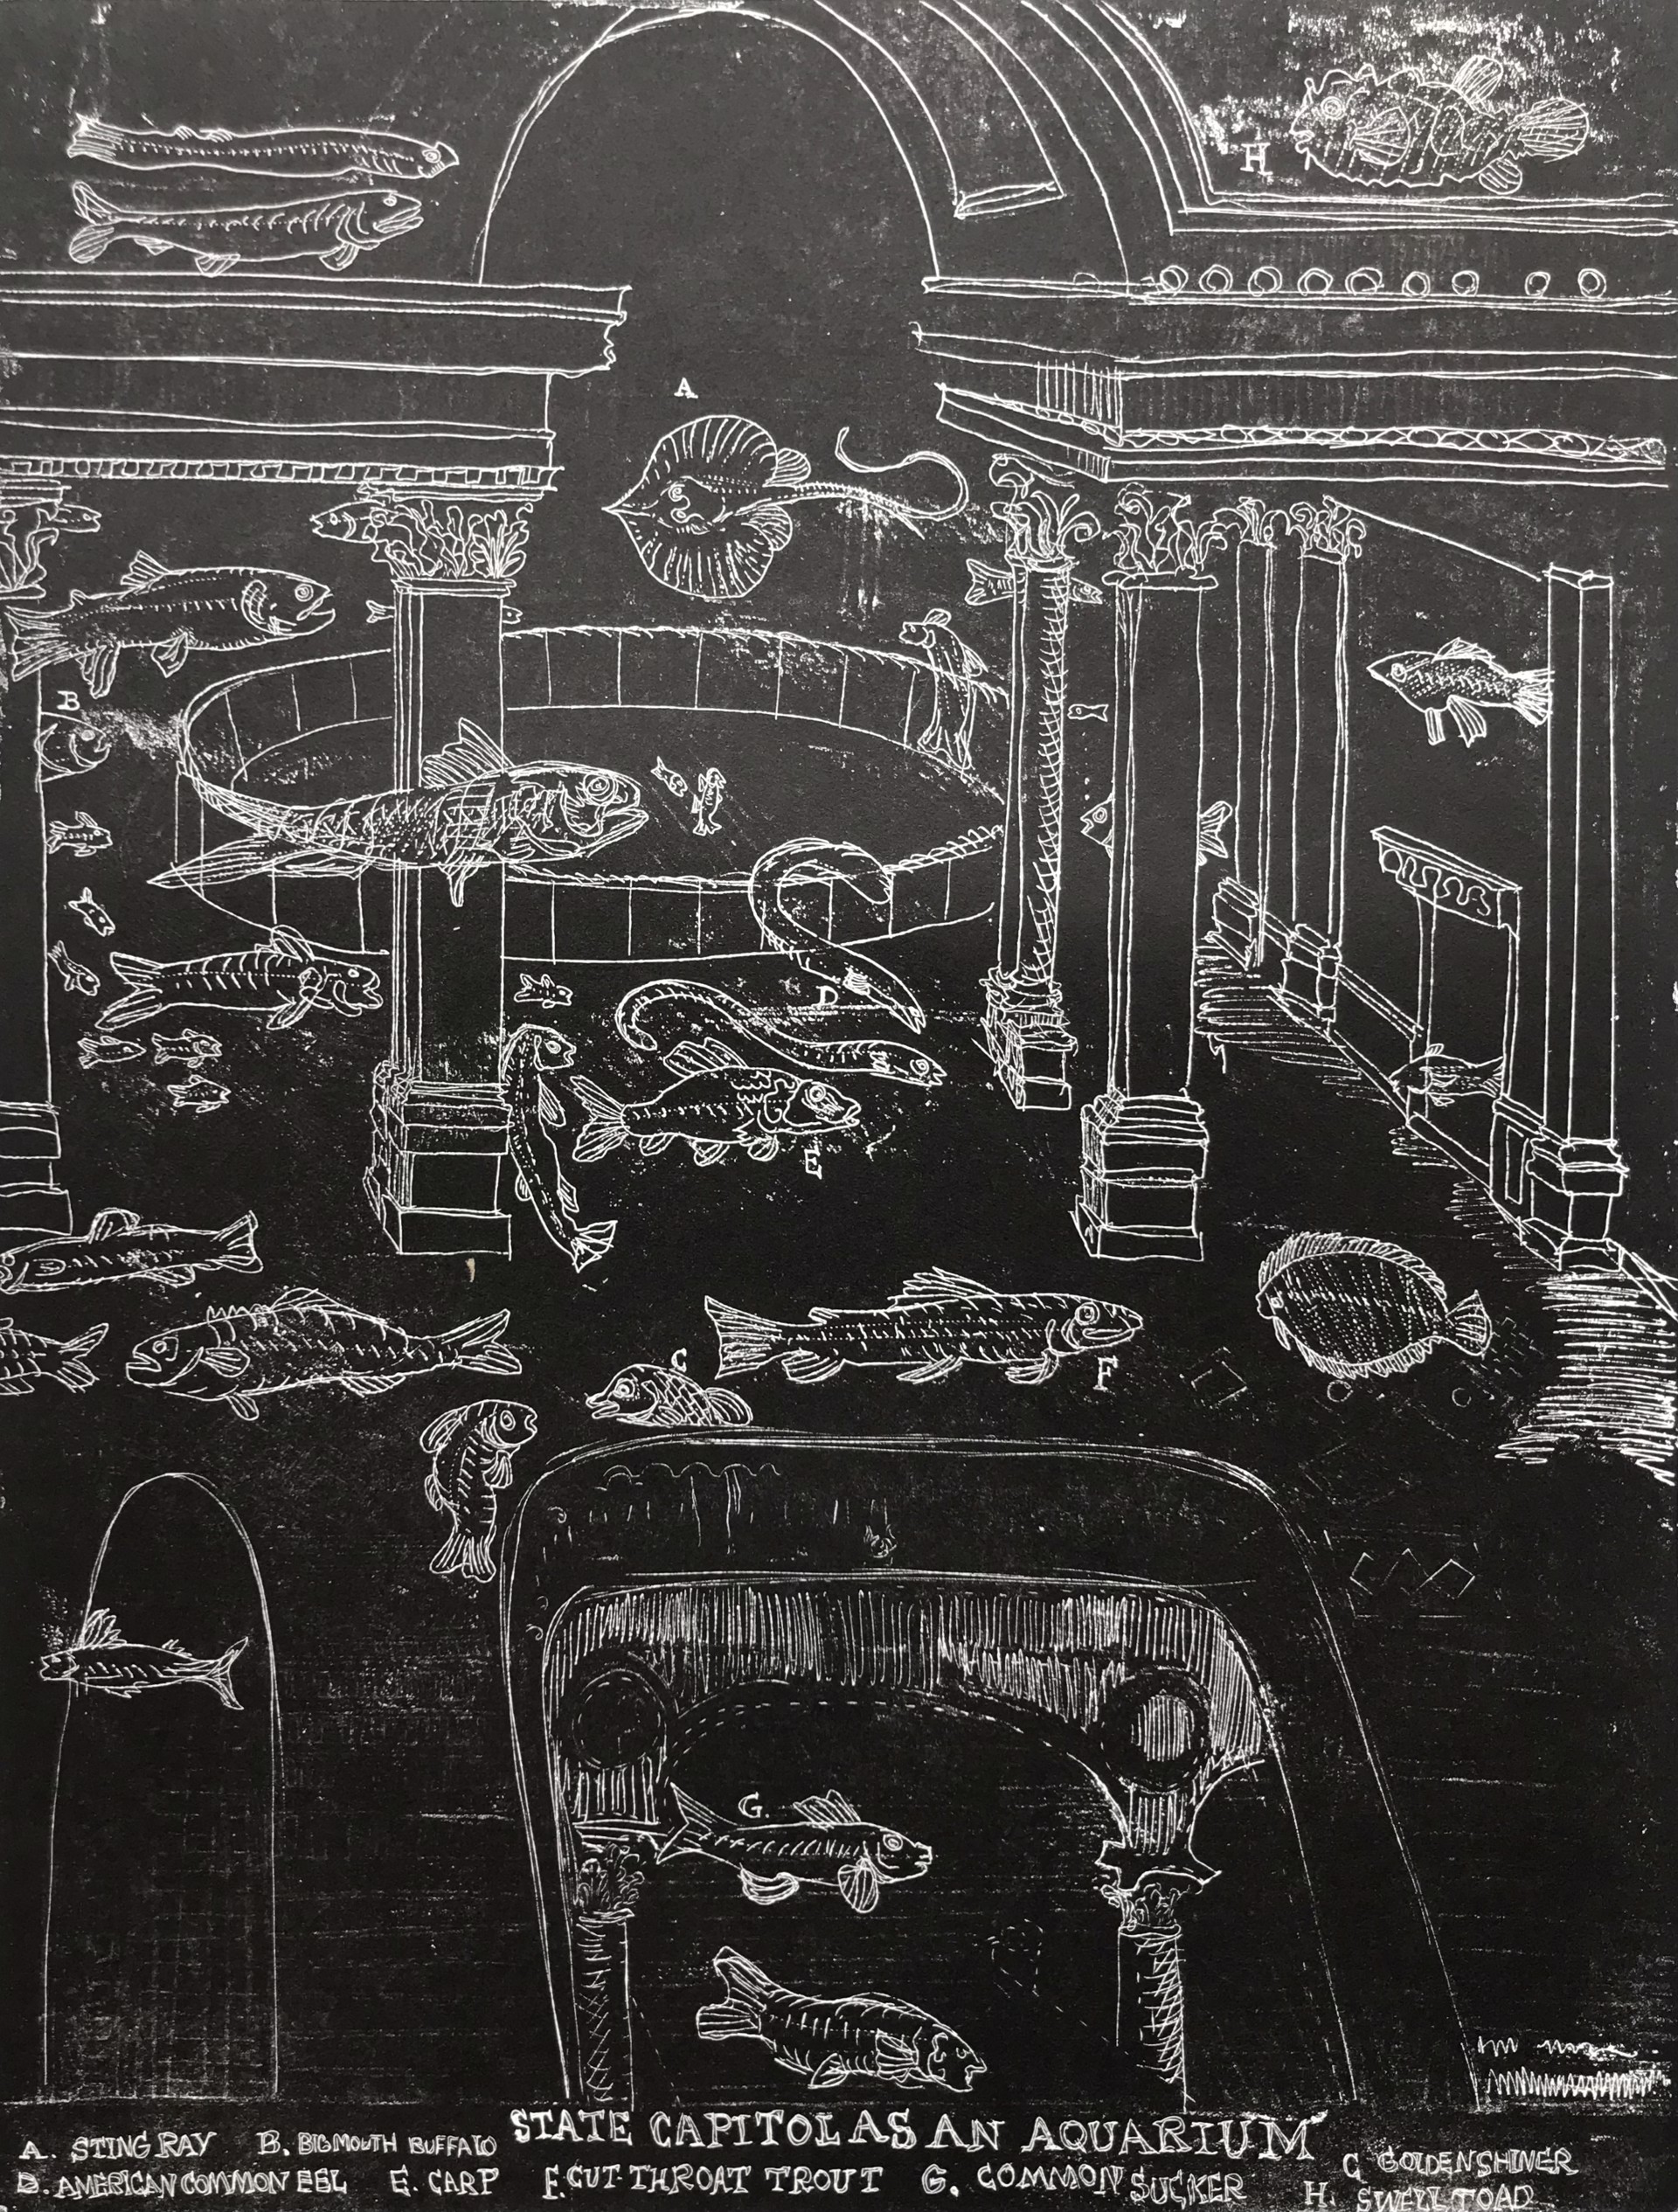 State Capitol As An Aquarium by Amy Worthen